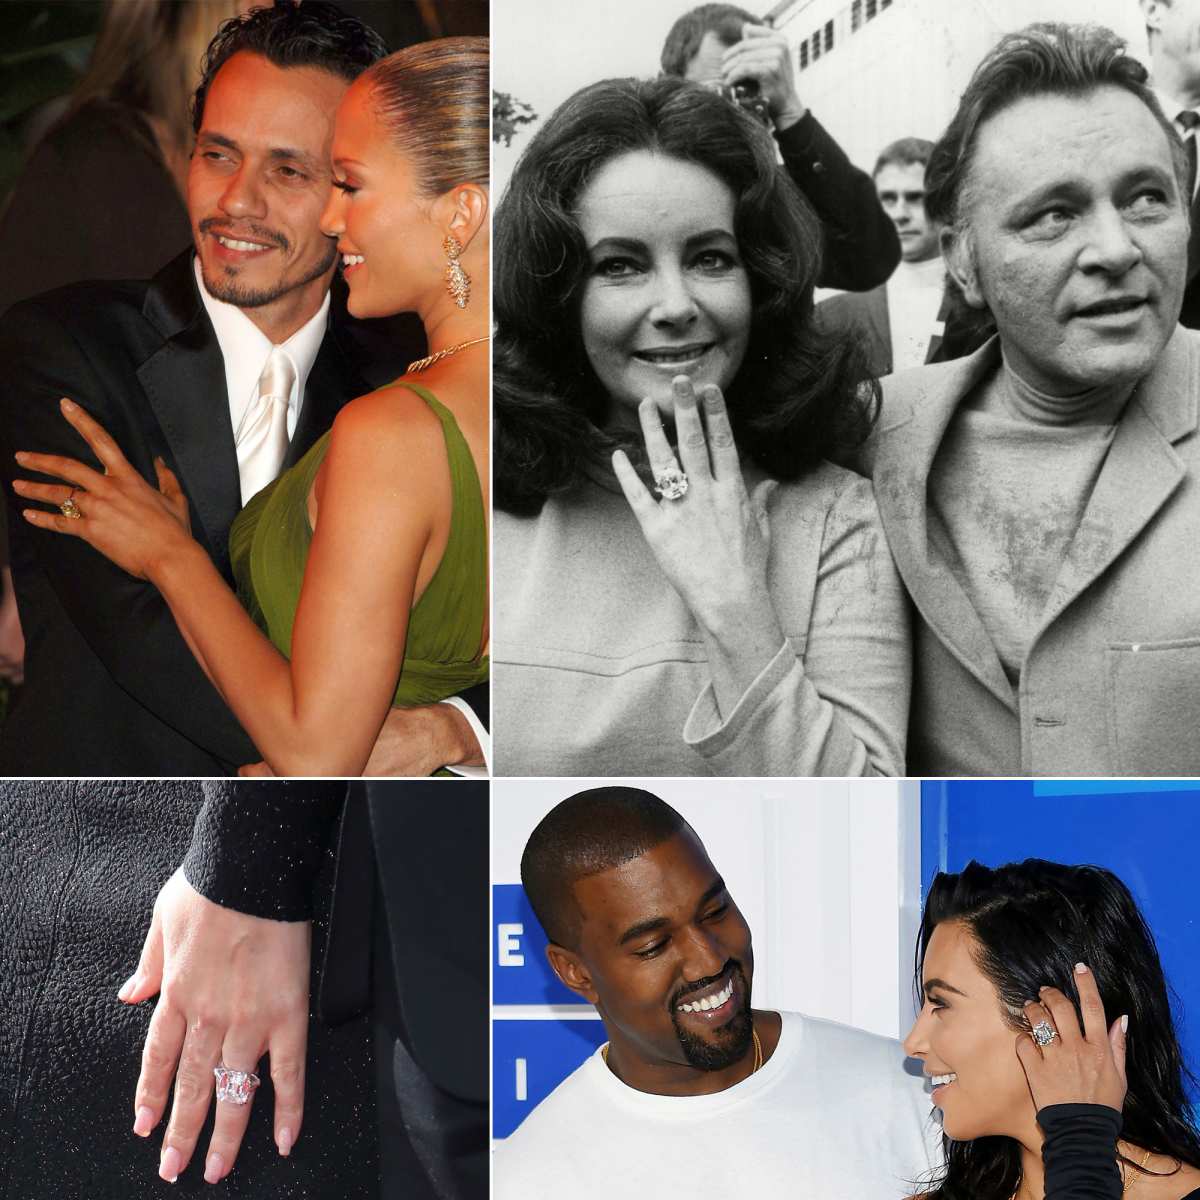 23 Of The Most Expensive Engagement Rings Of All Time